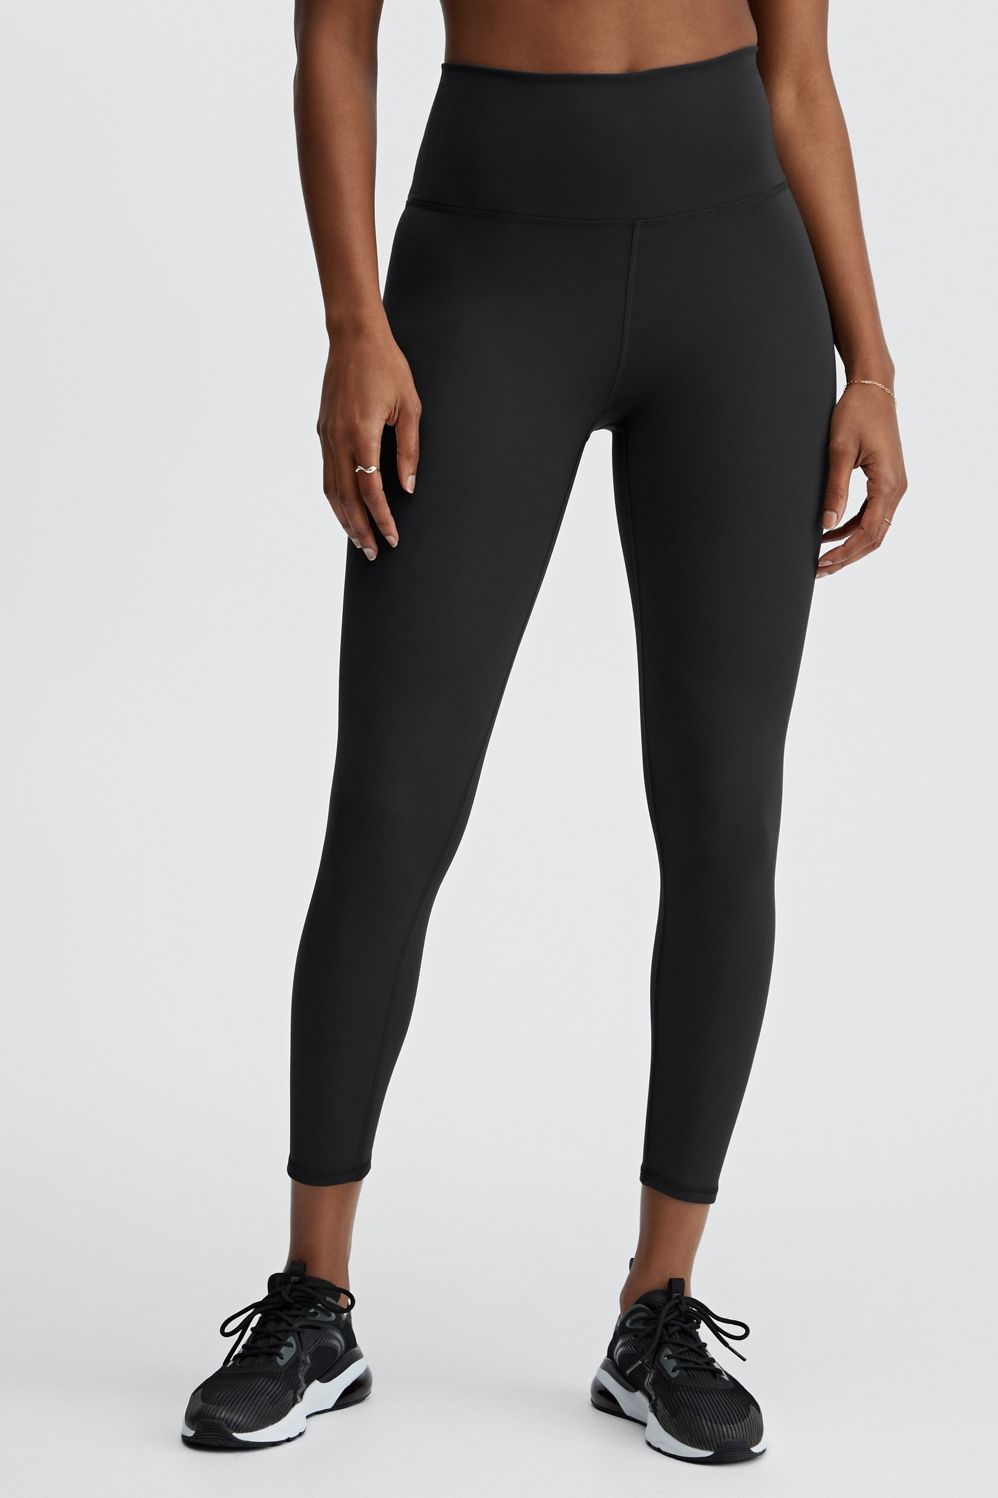 Ultra High-Waisted PureLuxe Essential 7/8 | Fabletics